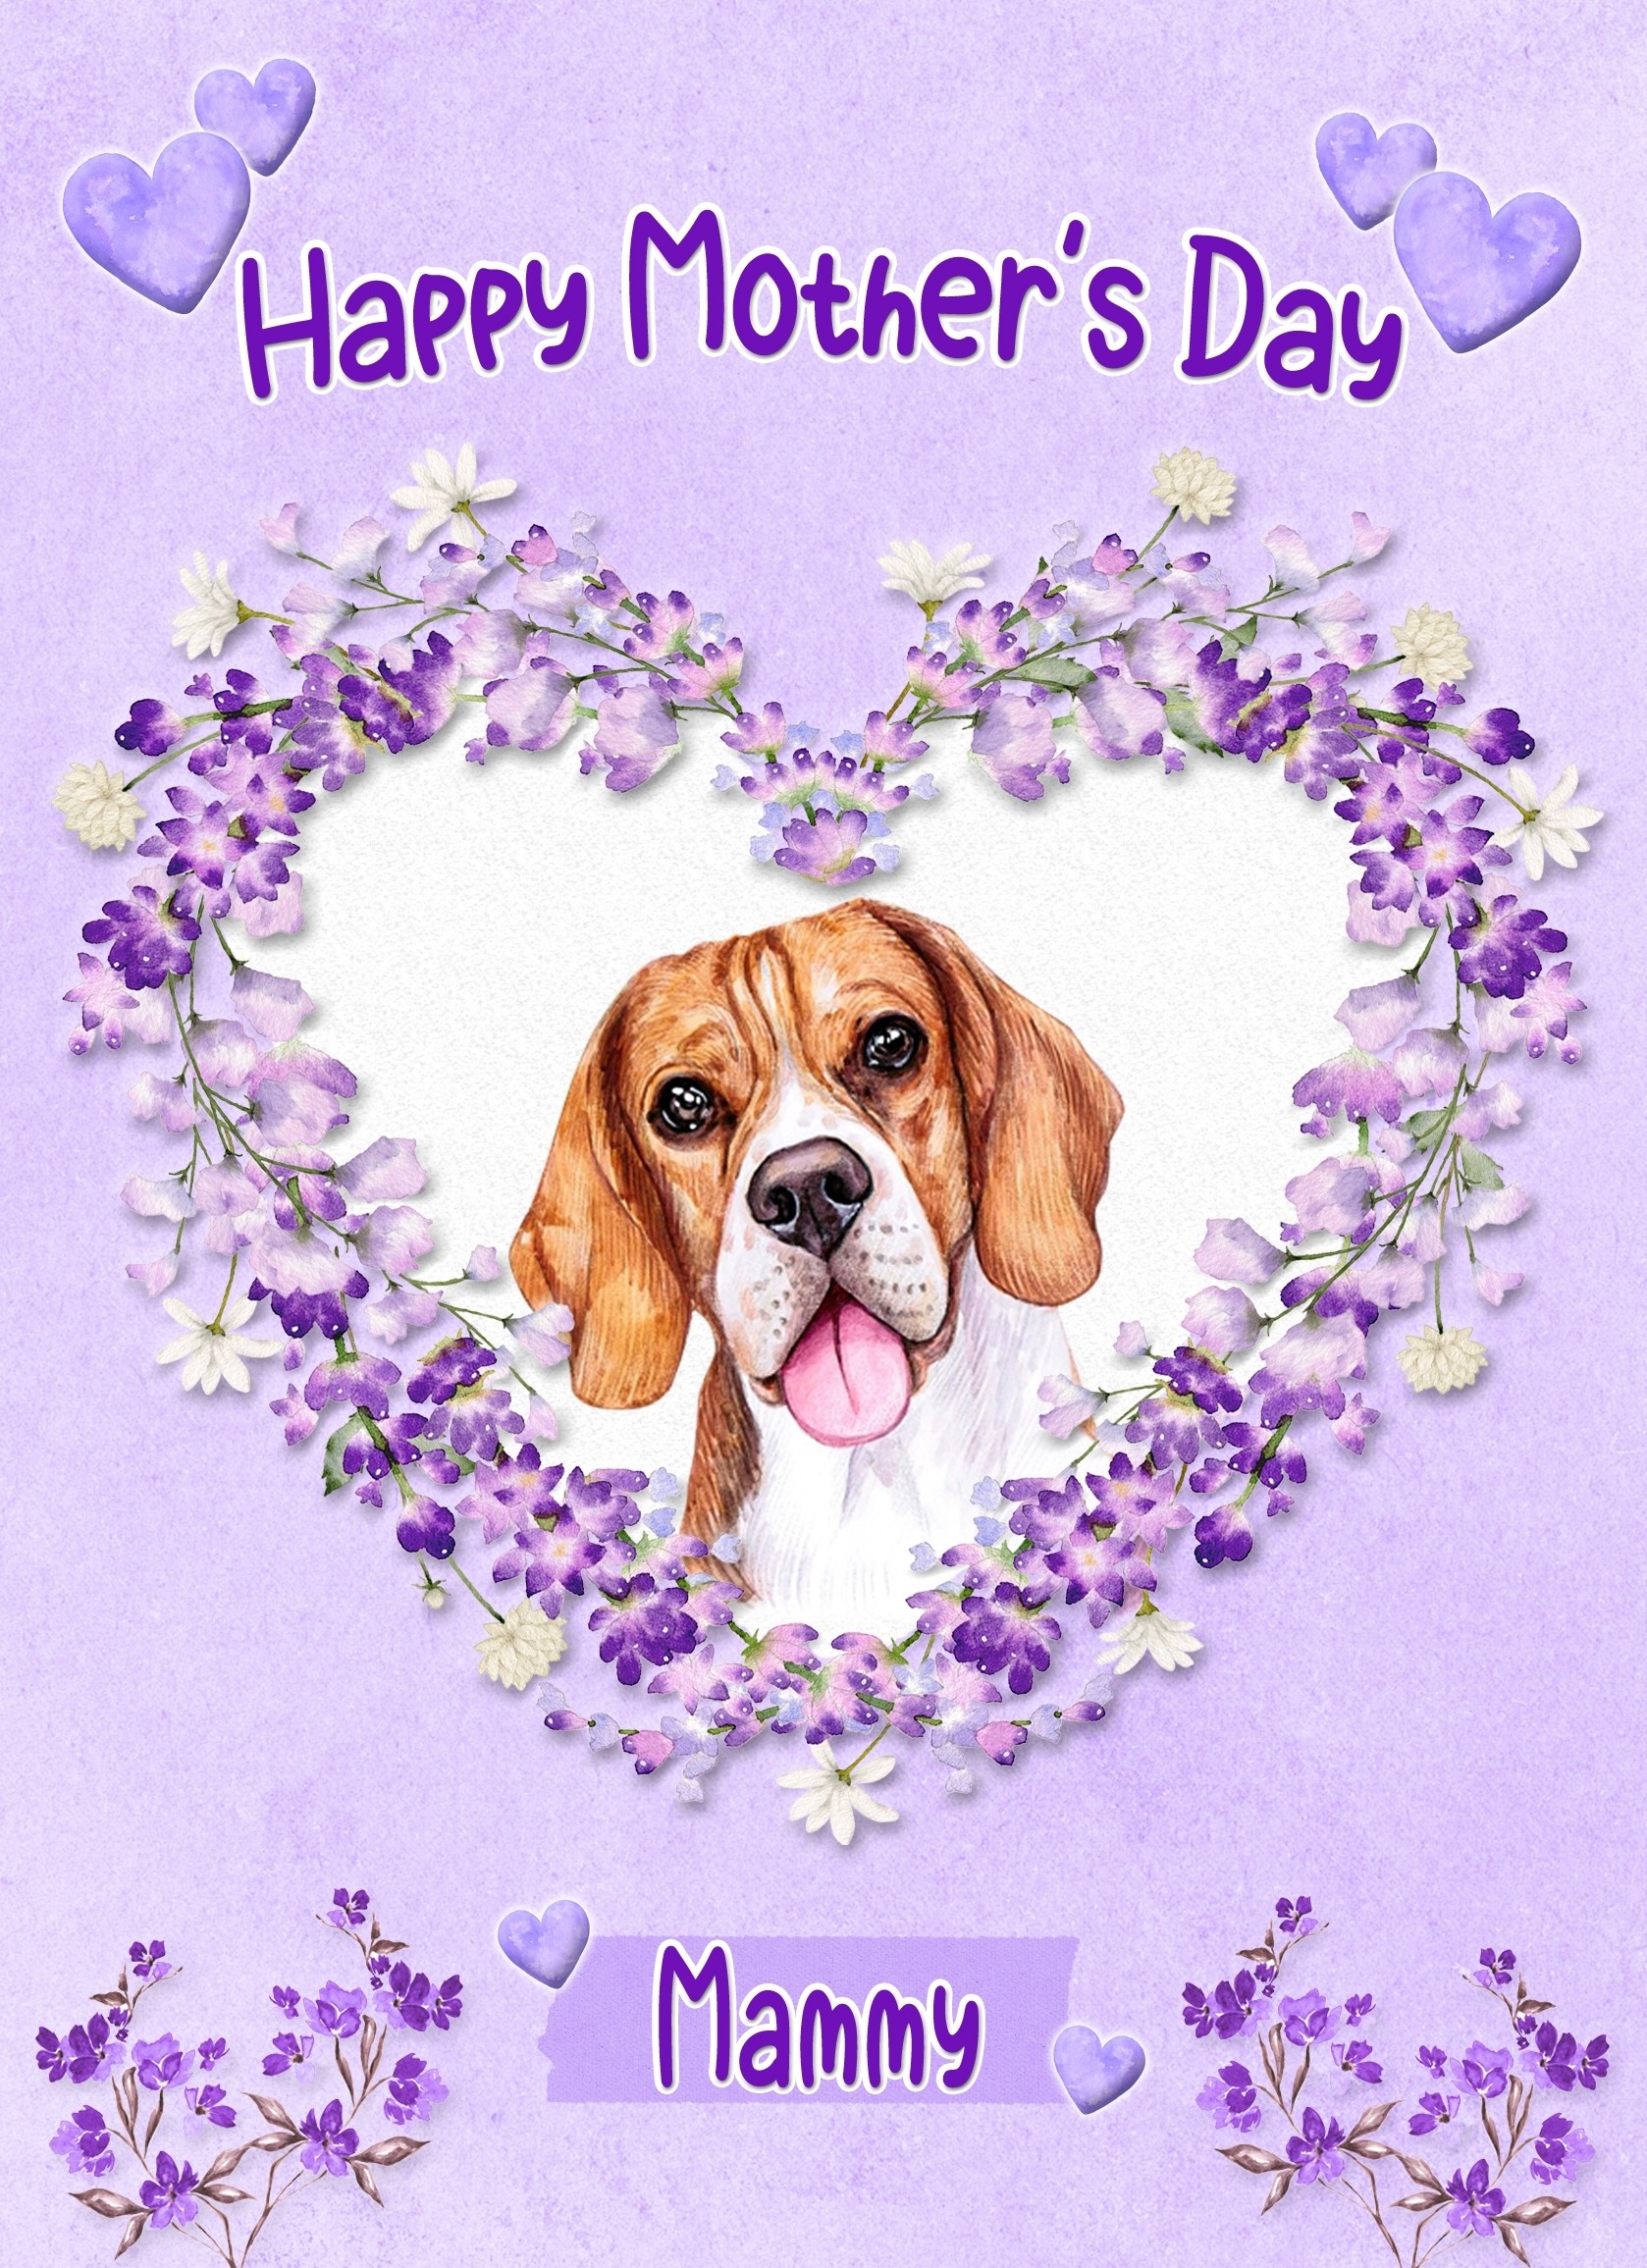 Beagle Dog Mothers Day Card (Happy Mothers, Mammy)